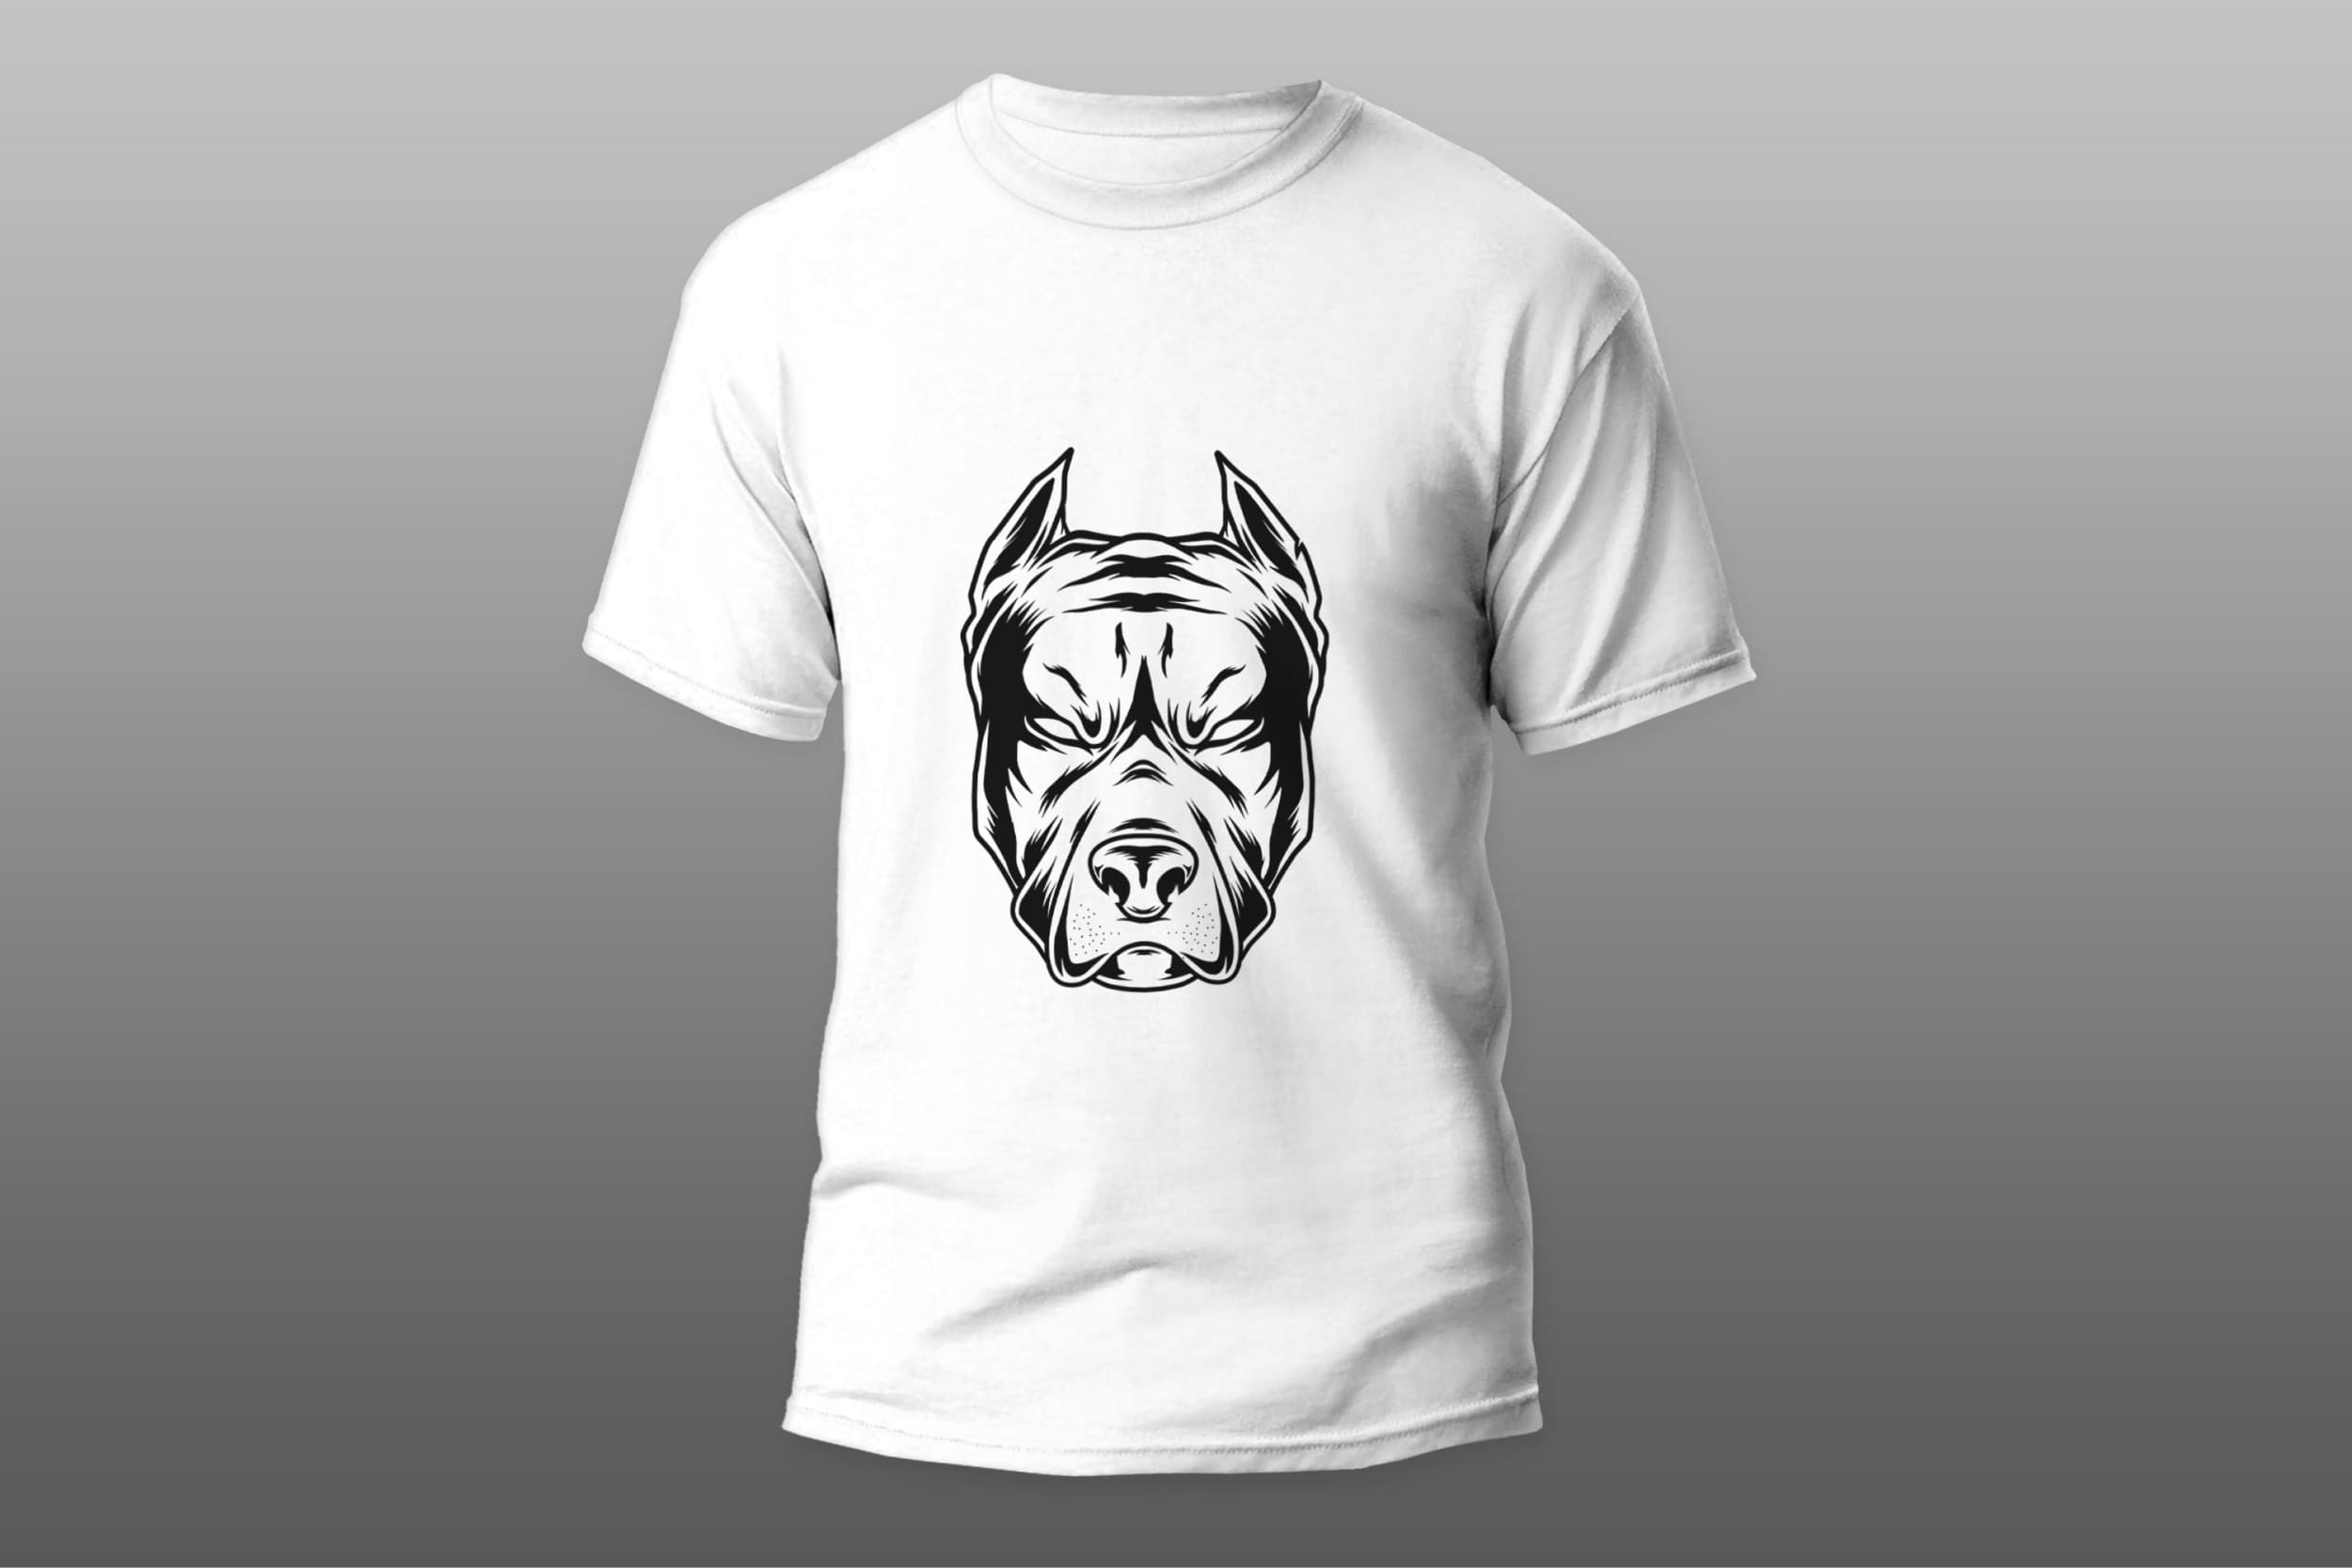 White T-shirt with a black pitbull face on a gray gradient background.